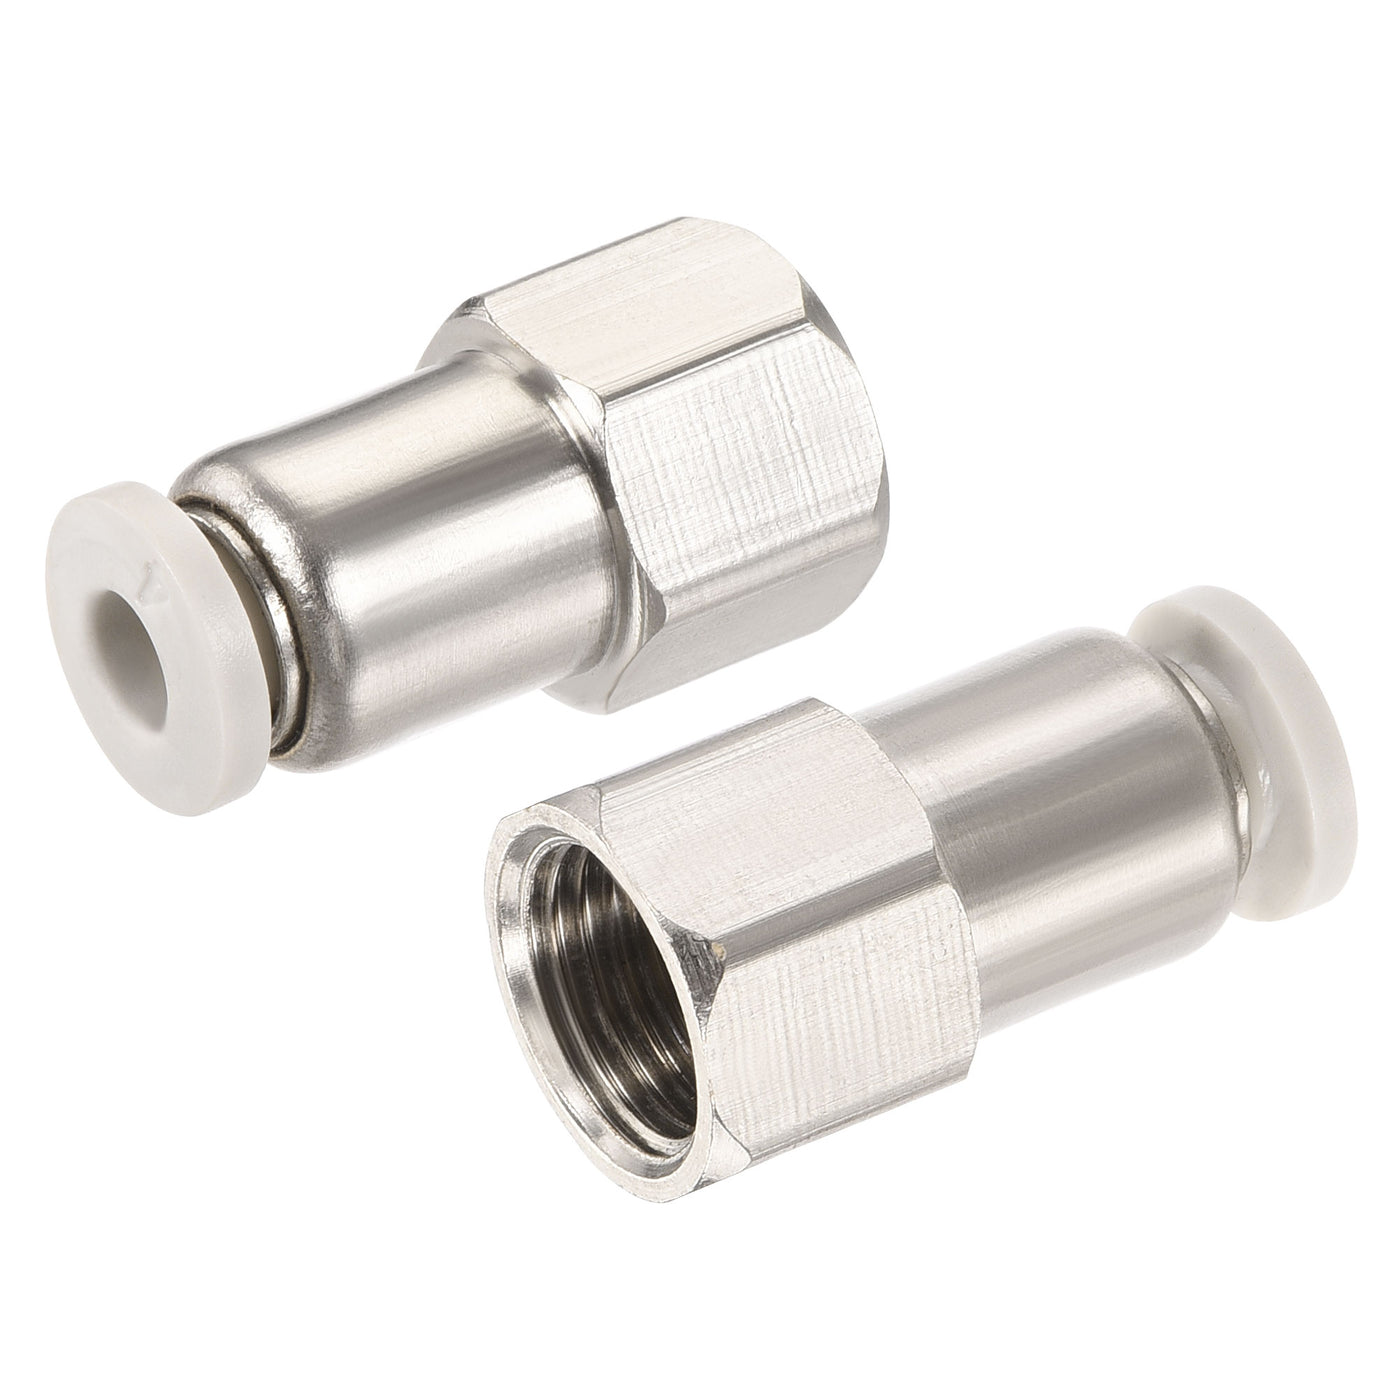 Harfington Push to Connect Fittings 1/8PT Female Thread Fit 4mm Tube OD Nickel-plated Copper Straight Union Fitting, Pack of 2